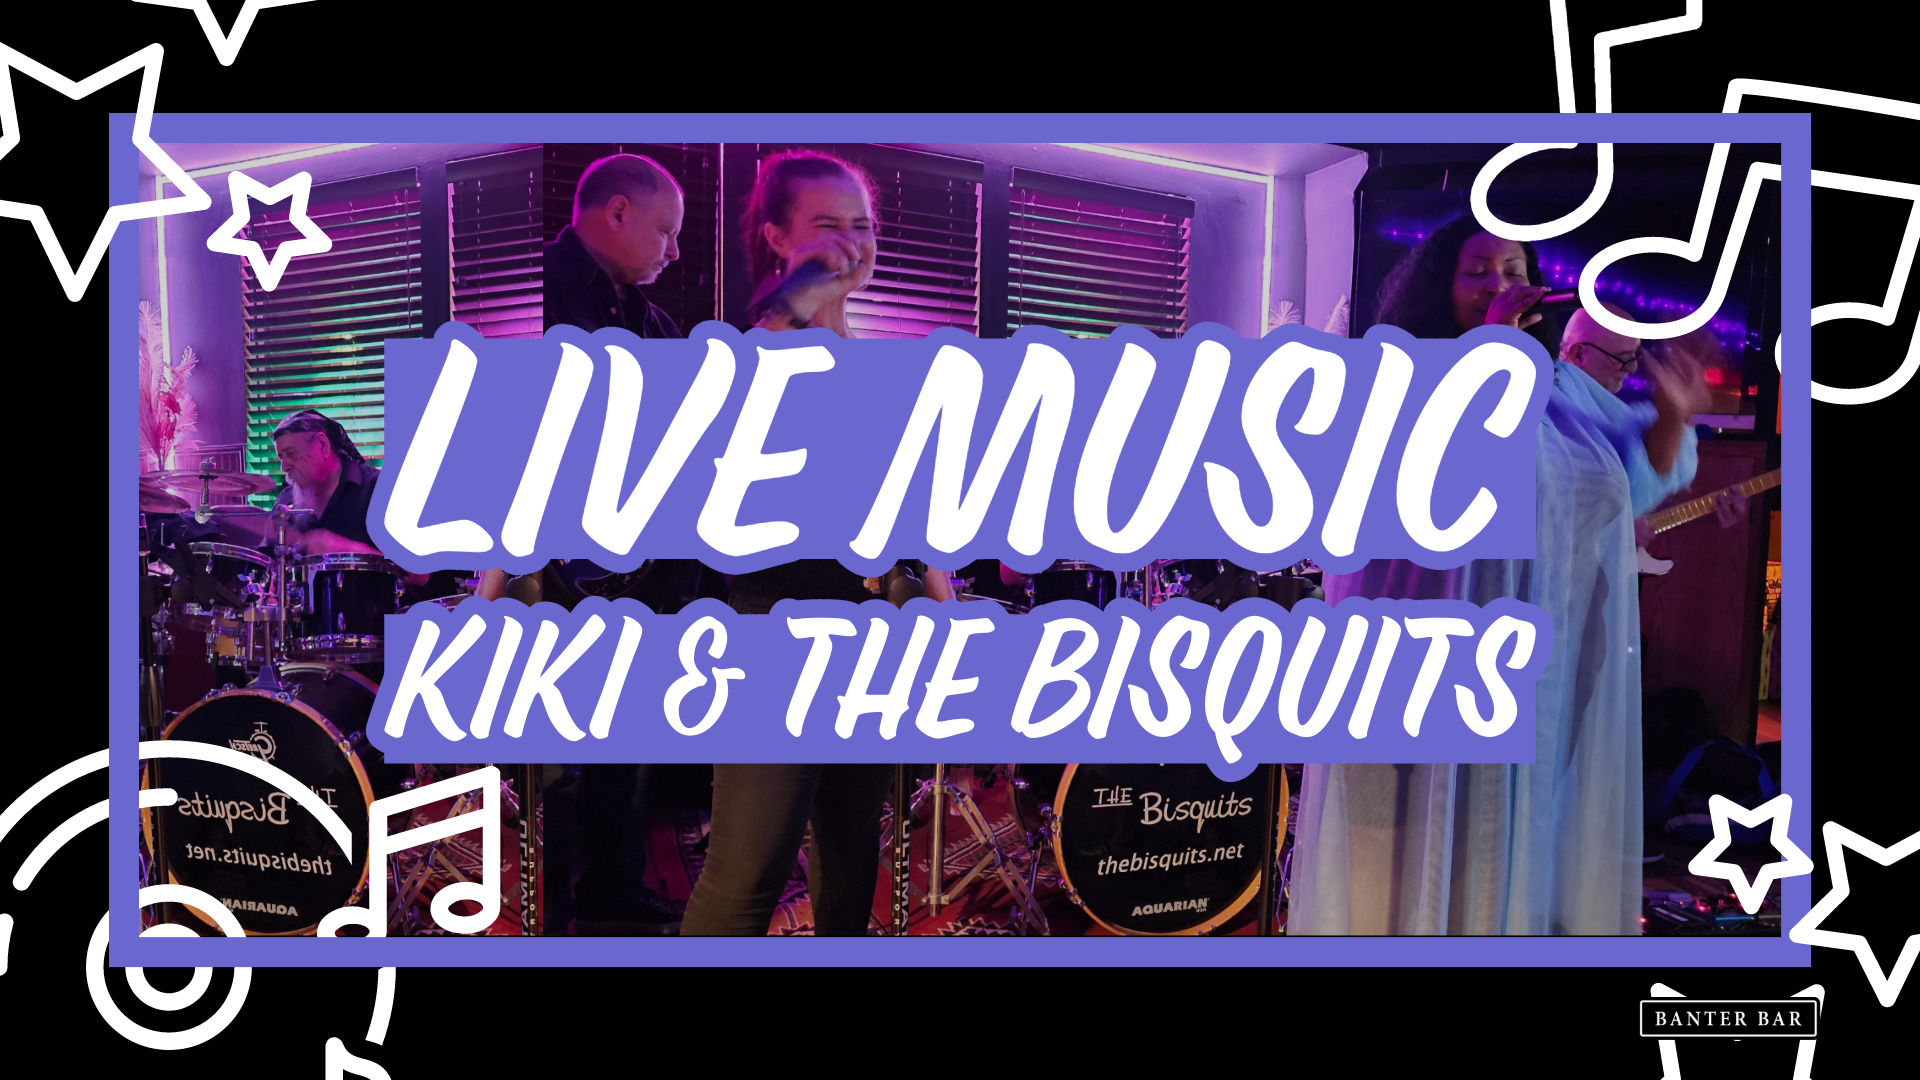 Live Music at Banter Bar West LA - Kiki and The Bisquits